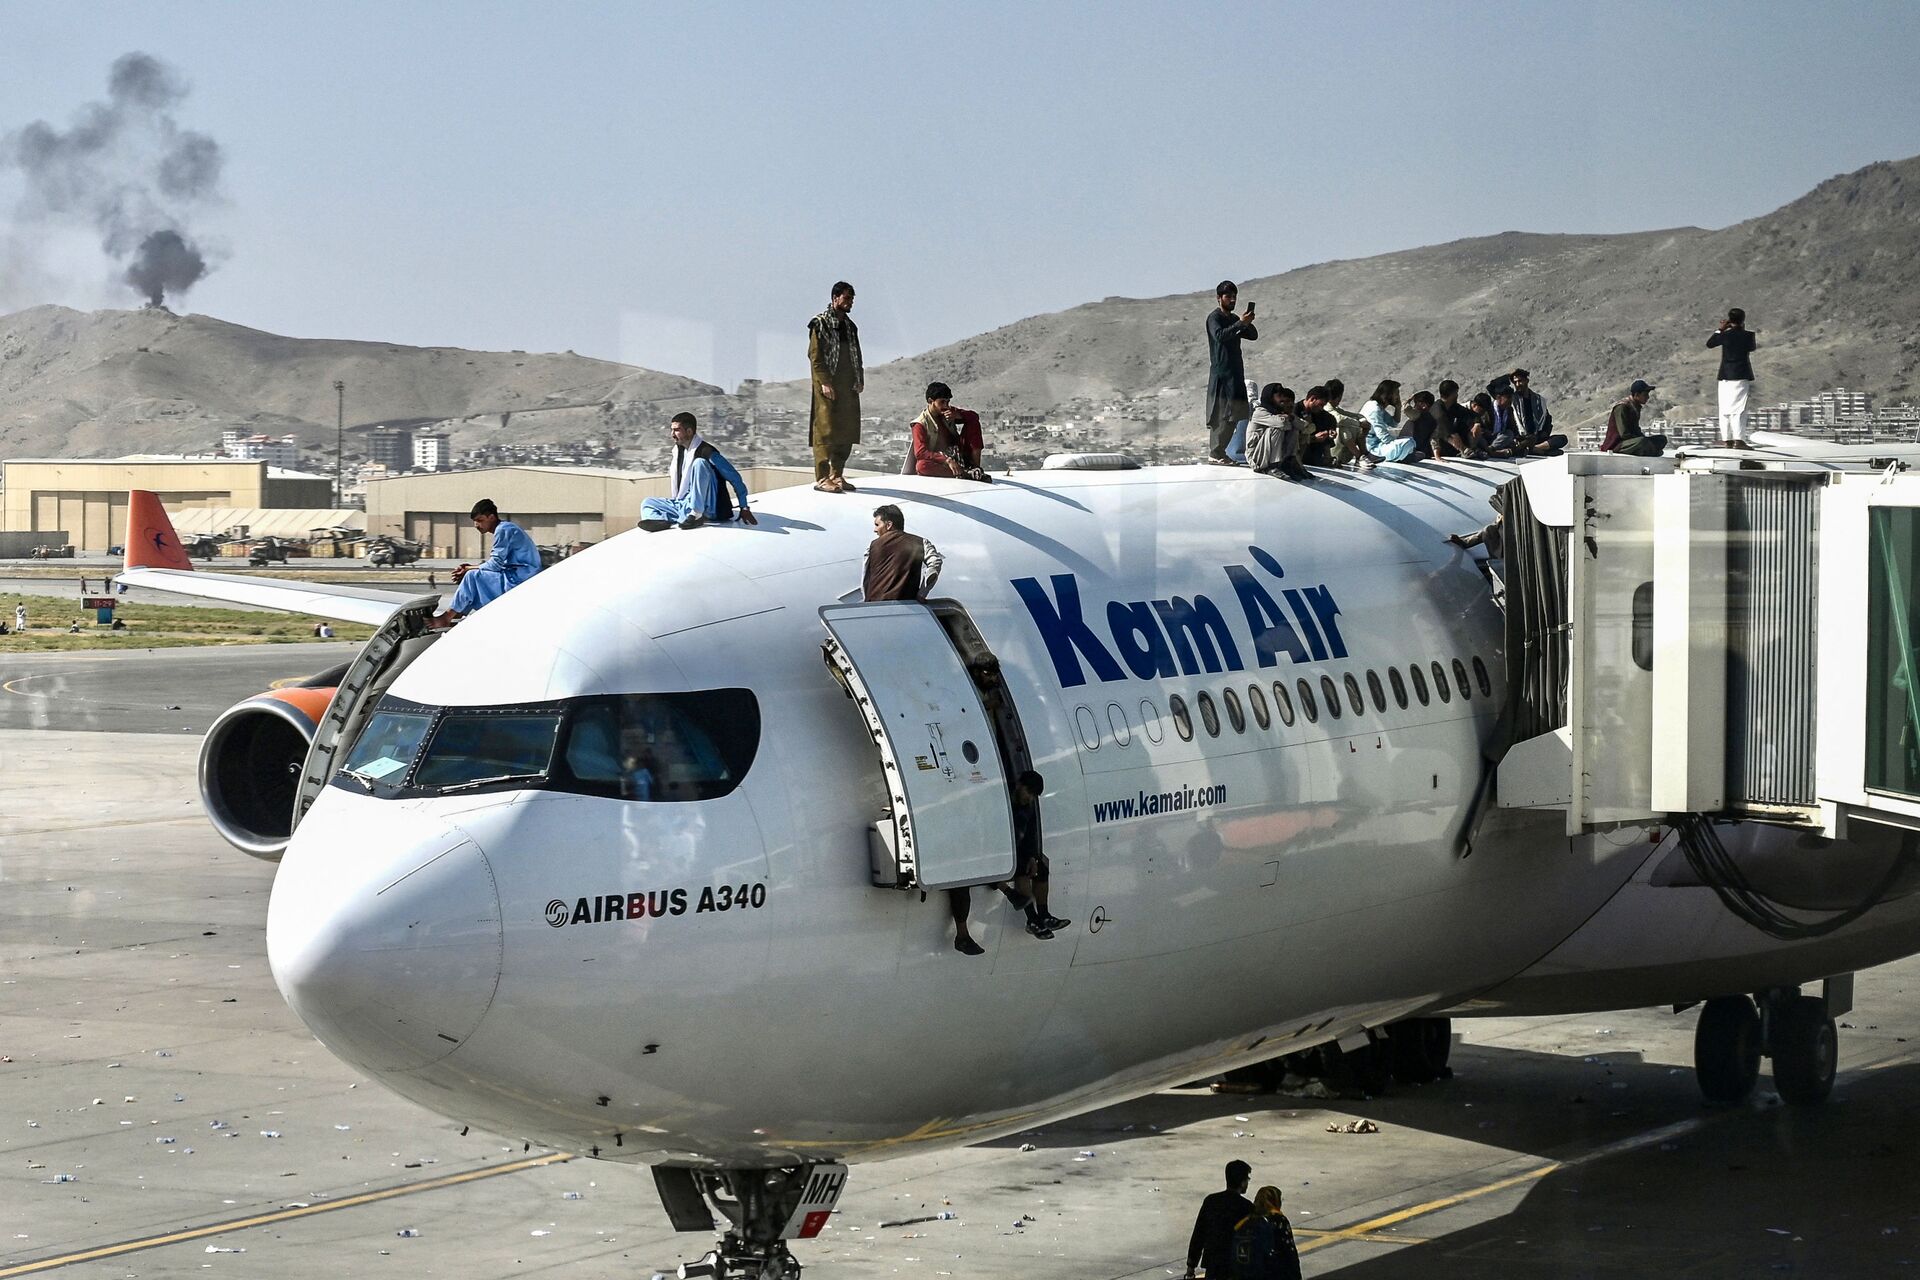 Afghan people climb atop a plane as they wait at the airport in Kabul on August 16, 2021, after a stunningly swift end to Afghanistan's 20-year war, as thousands of people mobbed the city's airport trying to flee the group's feared hardline brand of Islamist rule - Sputnik International, 1920, 07.09.2021